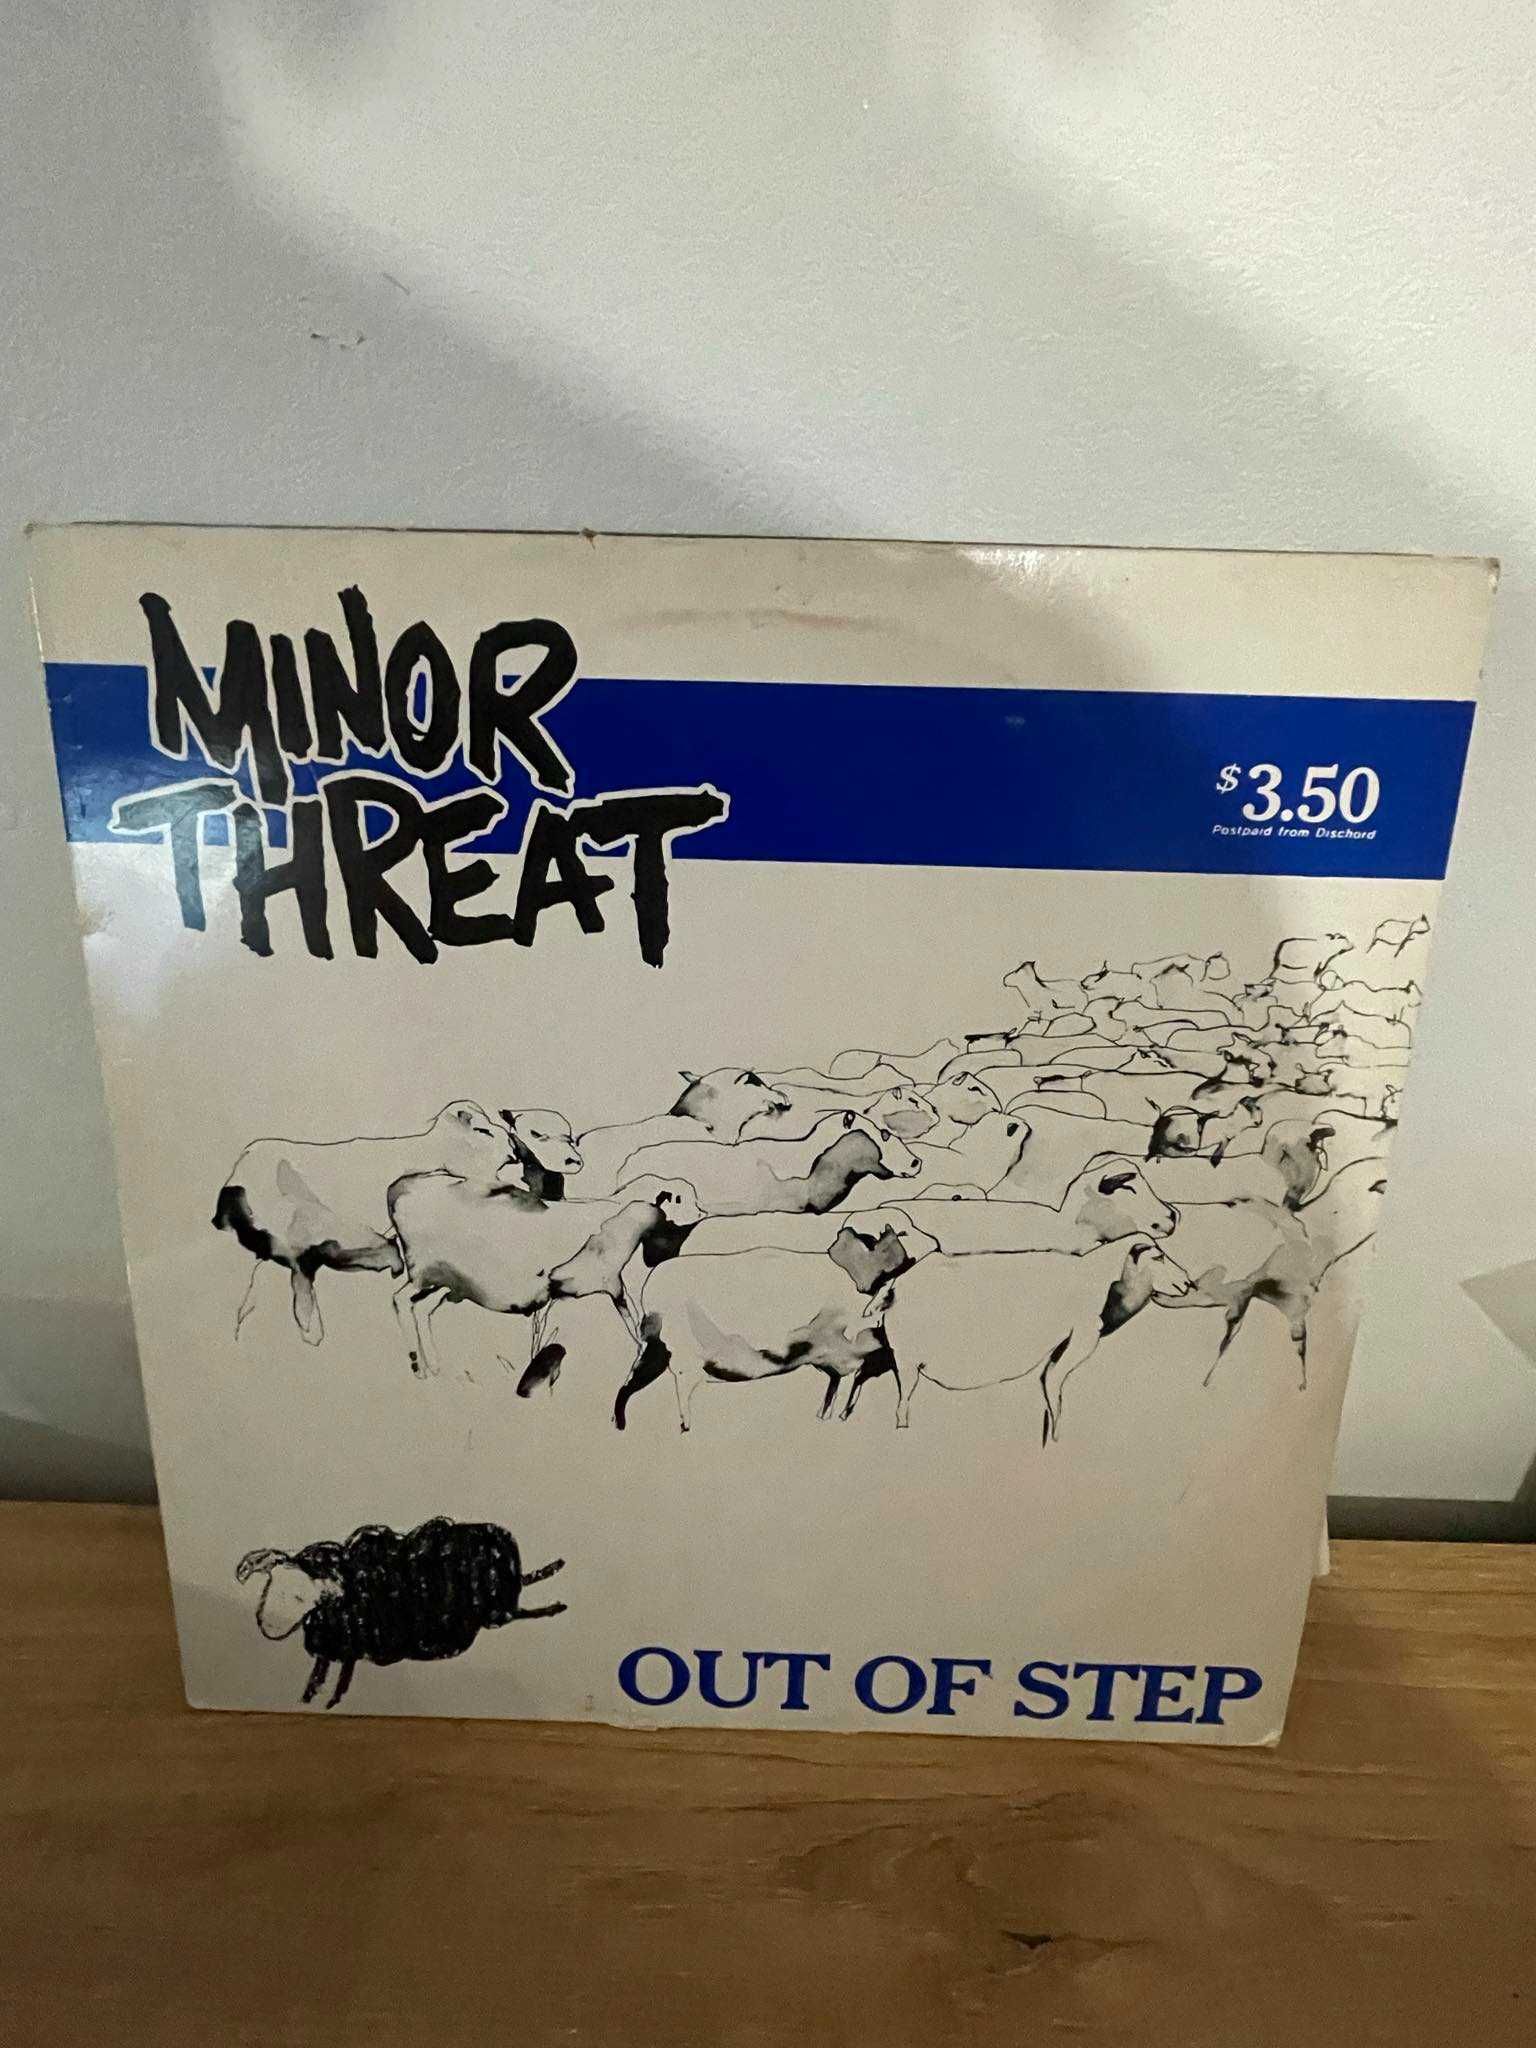 Minor Threat – Out Of Step